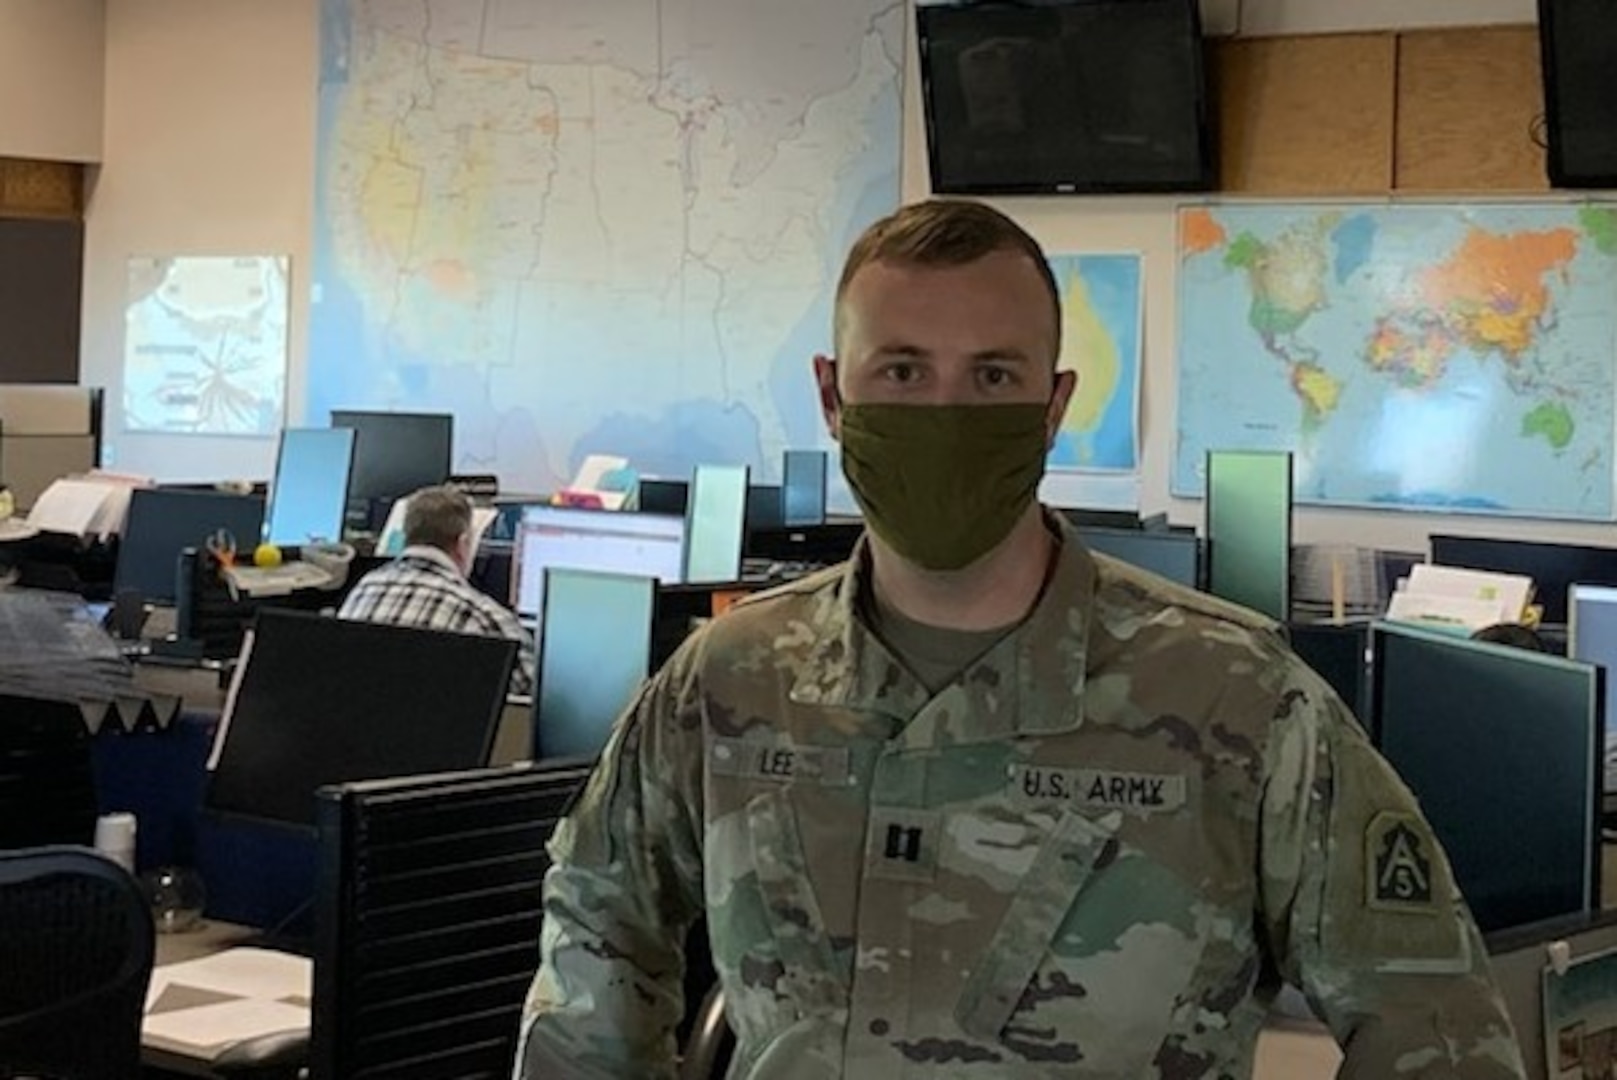 U.S. Army Capt. Erickson Lee, the U.S. Army North Defense Support to Civil Authorities plans officer who works with the Federal Emergency Management Agency Defense Coordinating Element in Region 10, stands in the National Interagency Fire Center operations room in Boise, Idaho, July 1, 2020. Lee deployed to the NIFC for the summer fire season from Anchorage, Alaska, where he is stationed.